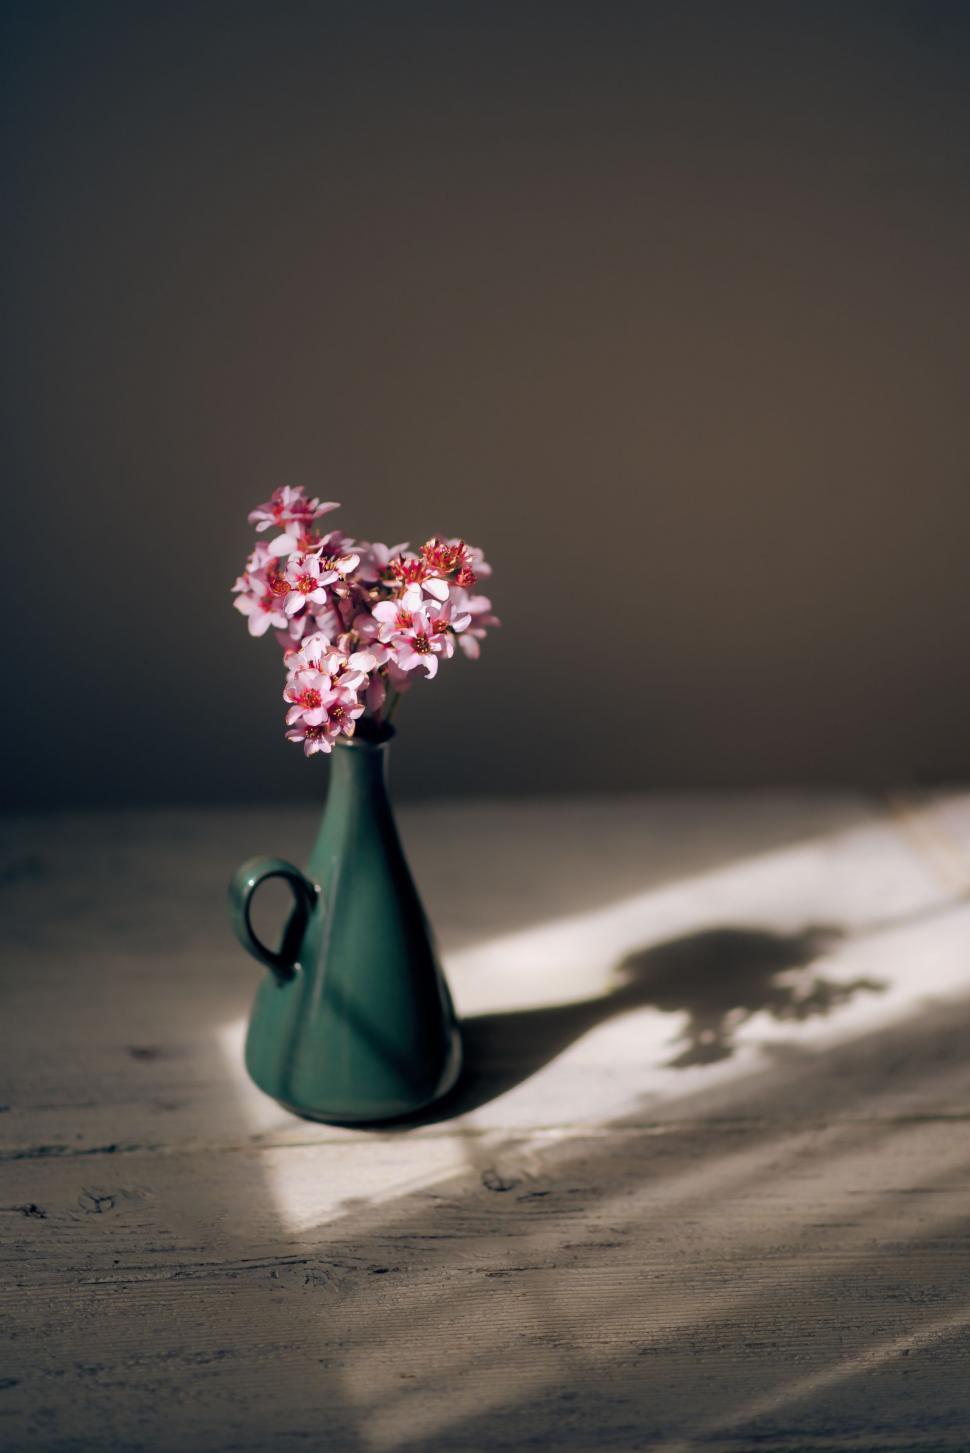 Free Image of Green Vase With Pink Flowers on Table 